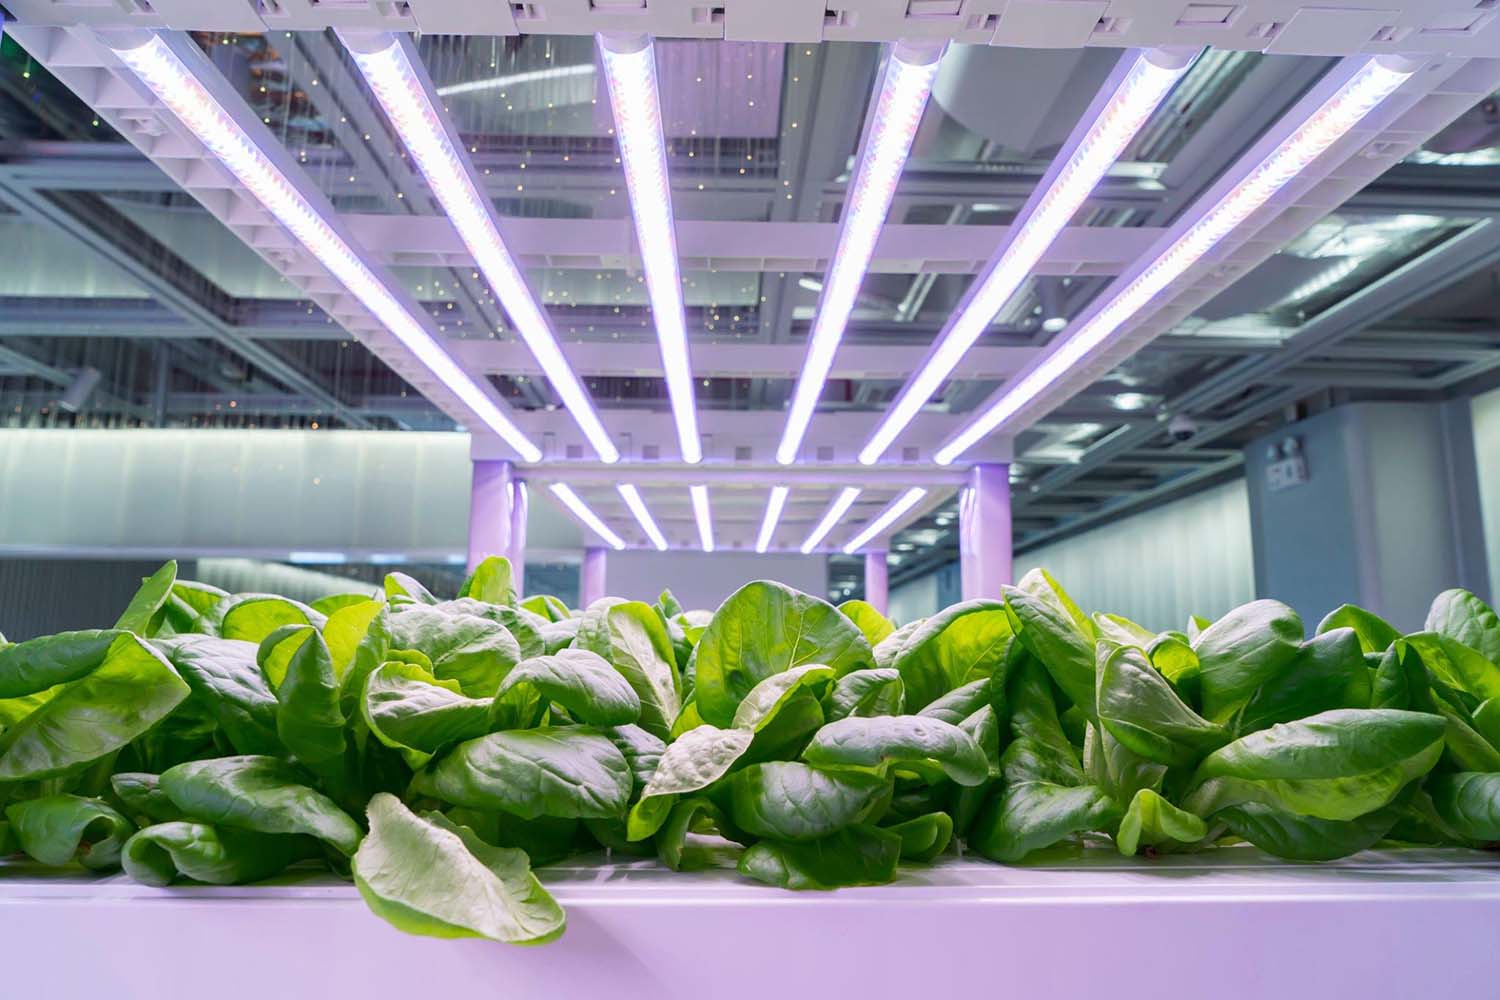 How to Grow Healthy Hydroponic Plants